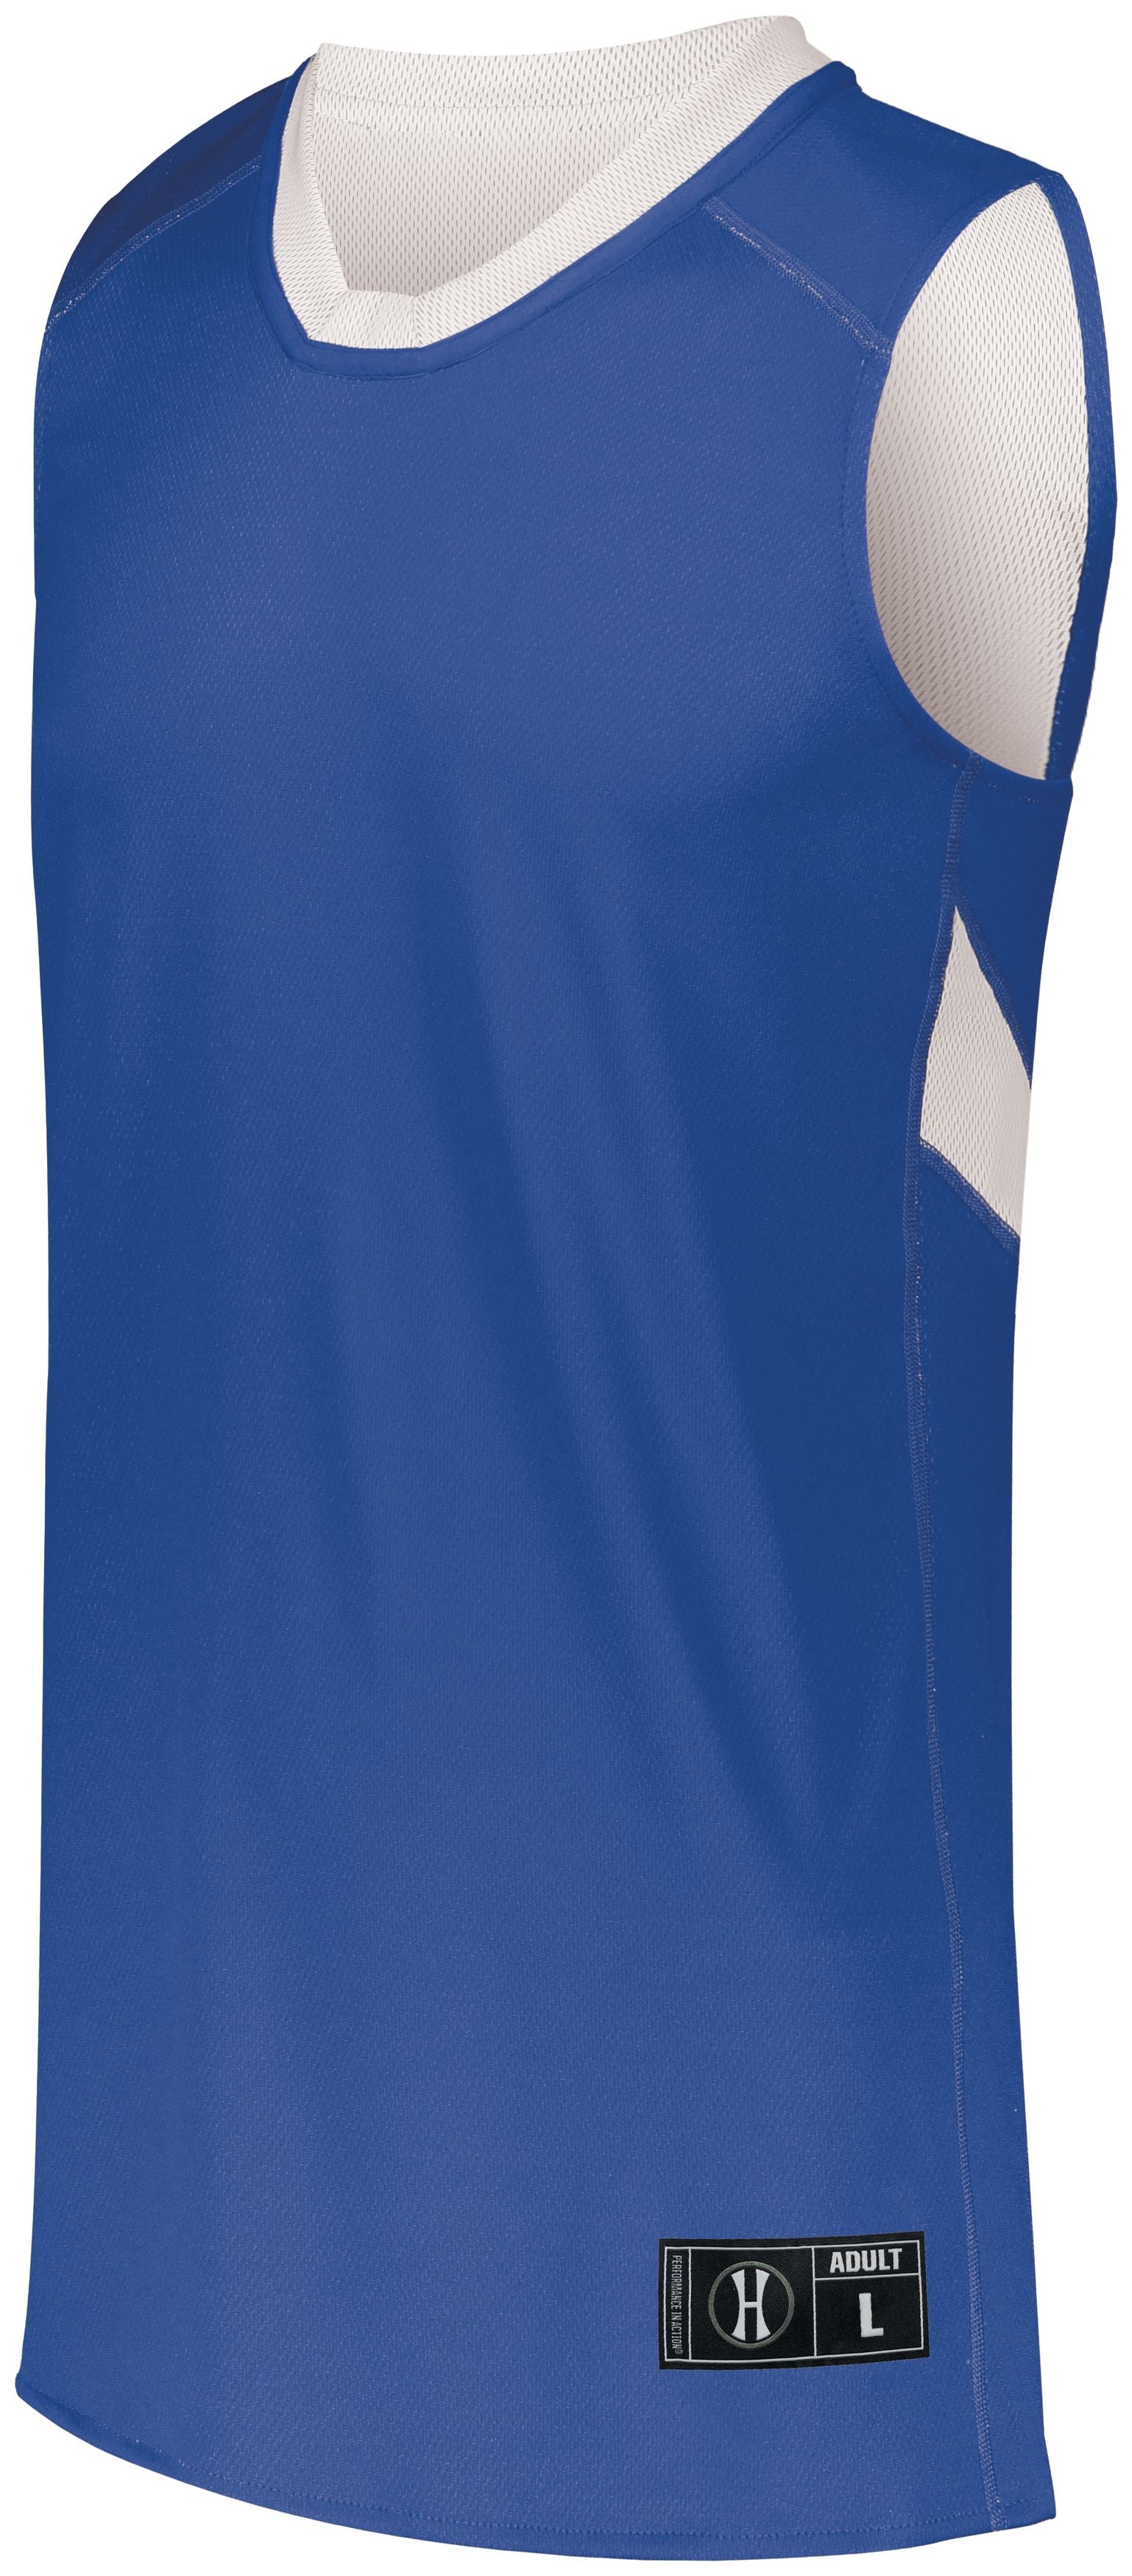 Holloway Dual-Side Single Ply Basketball Jersey in Royal/White  -Part of the Adult, Adult-Jersey, Basketball, Holloway, Shirts, All-Sports, All-Sports-1 product lines at KanaleyCreations.com